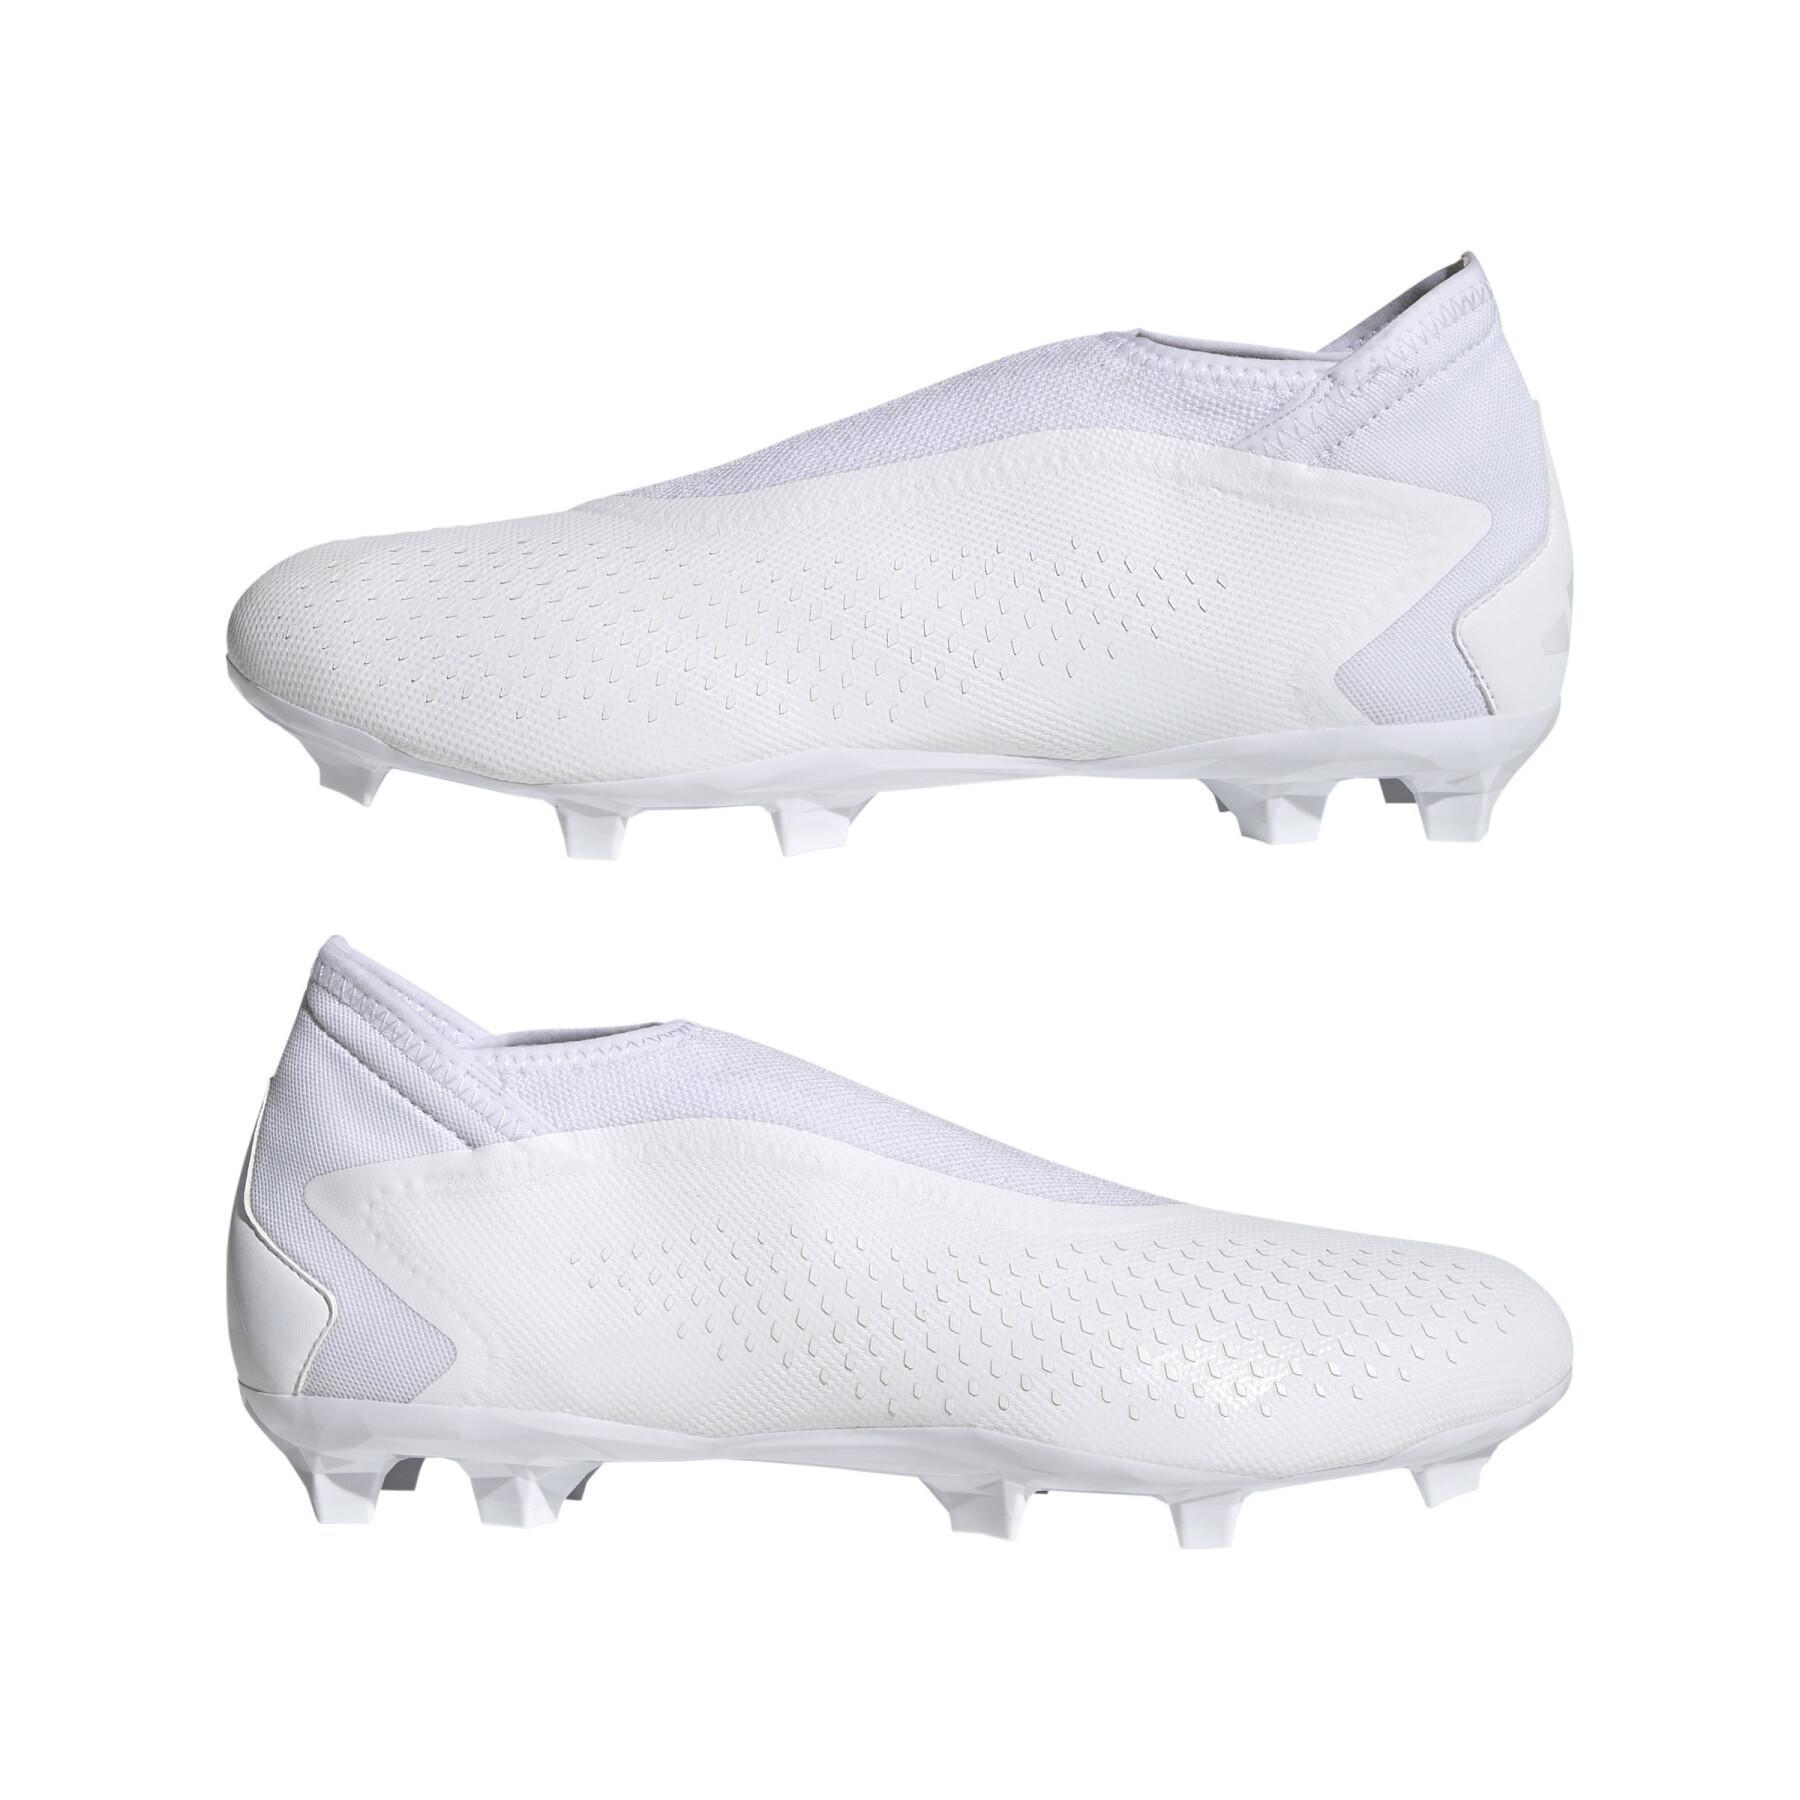 Chaussures de football sans lacets adidas Predator Accuracy.3 - Pearlized Pack